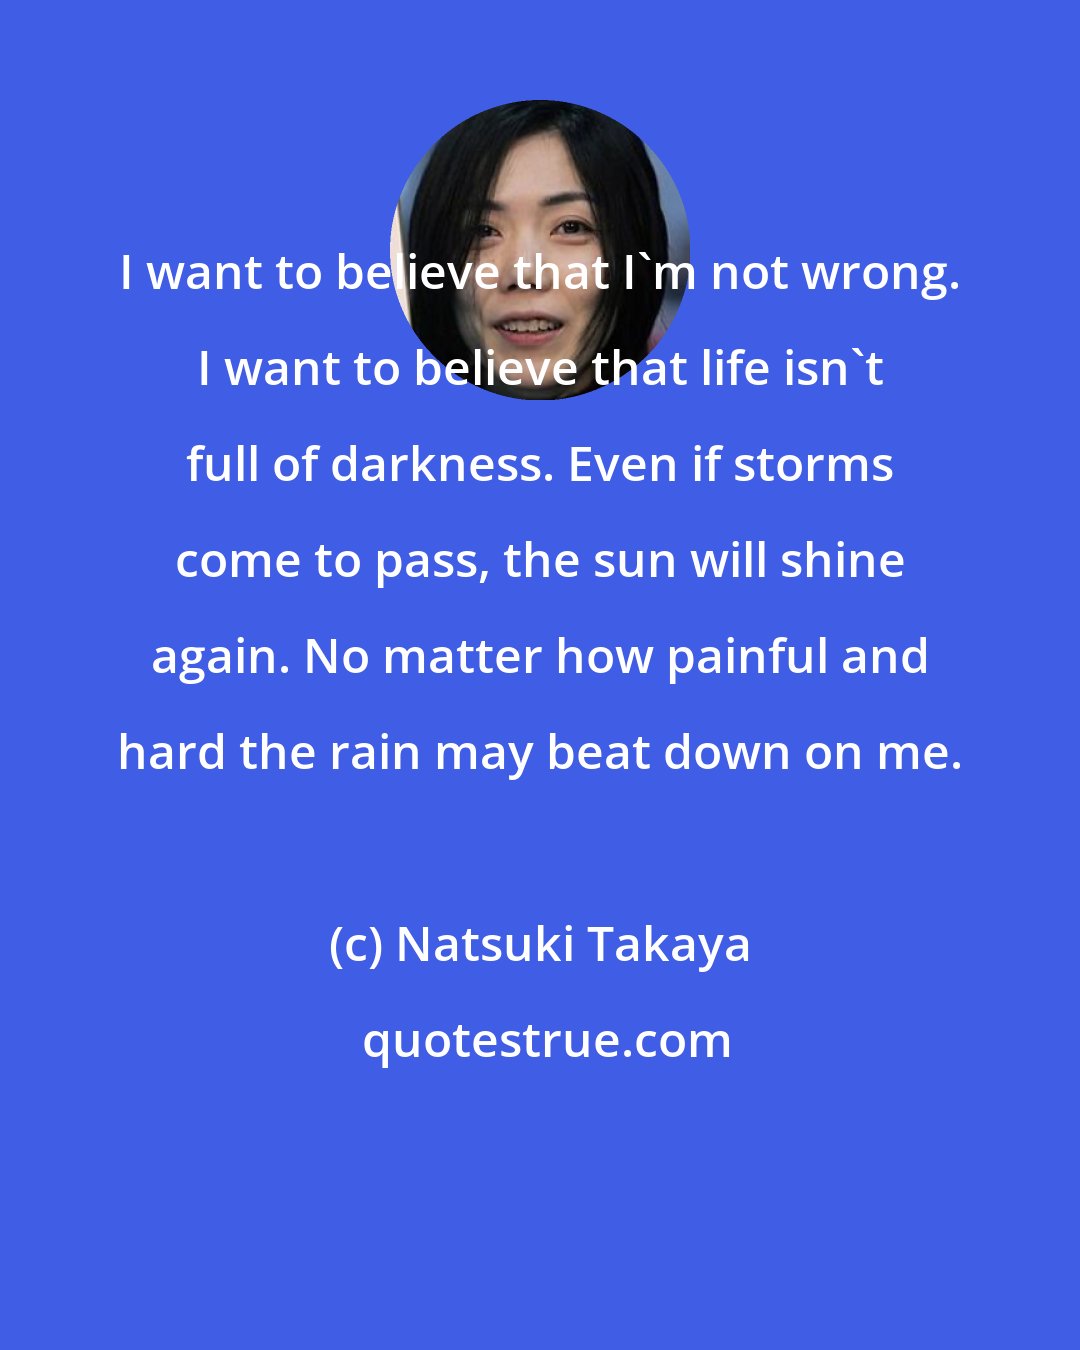 Natsuki Takaya: I want to believe that I'm not wrong. I want to believe that life isn't full of darkness. Even if storms come to pass, the sun will shine again. No matter how painful and hard the rain may beat down on me.